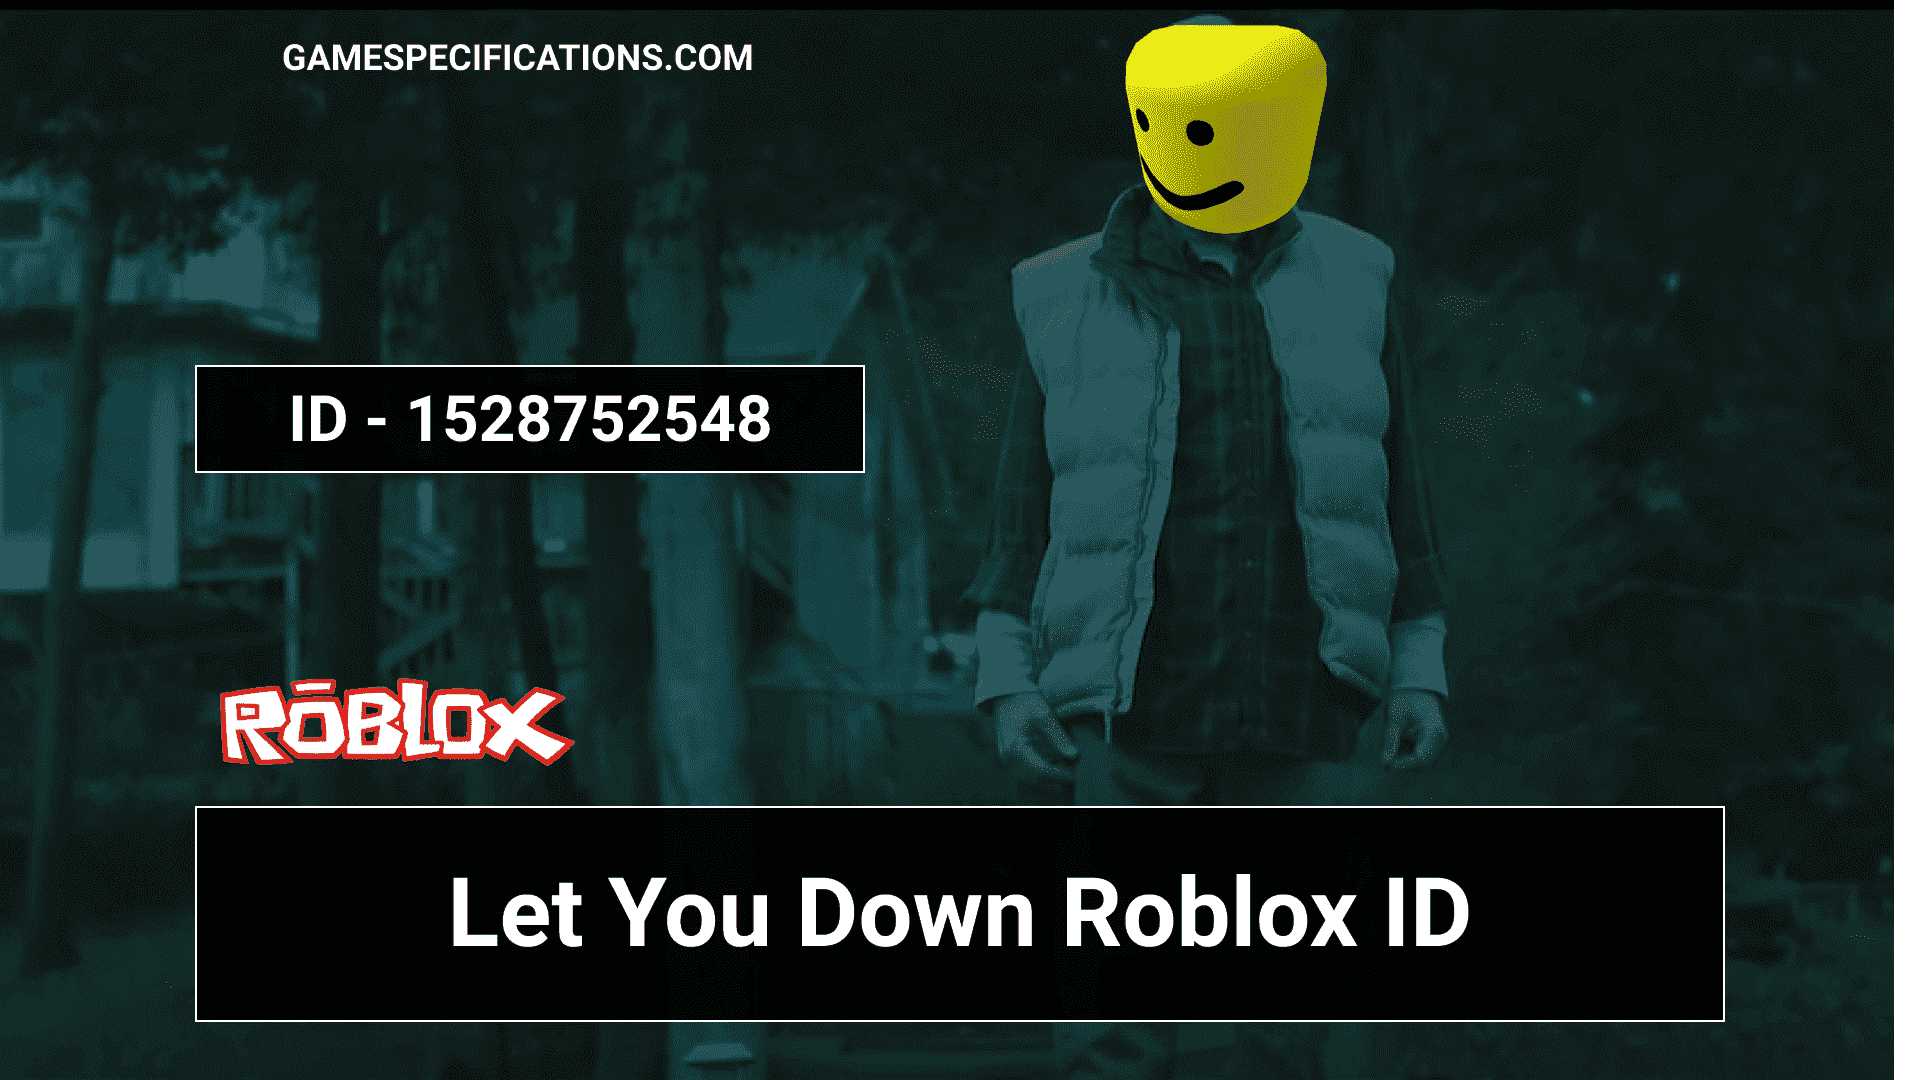 33 Let You Down Roblox Id Codes To Play The Music Game Specifications